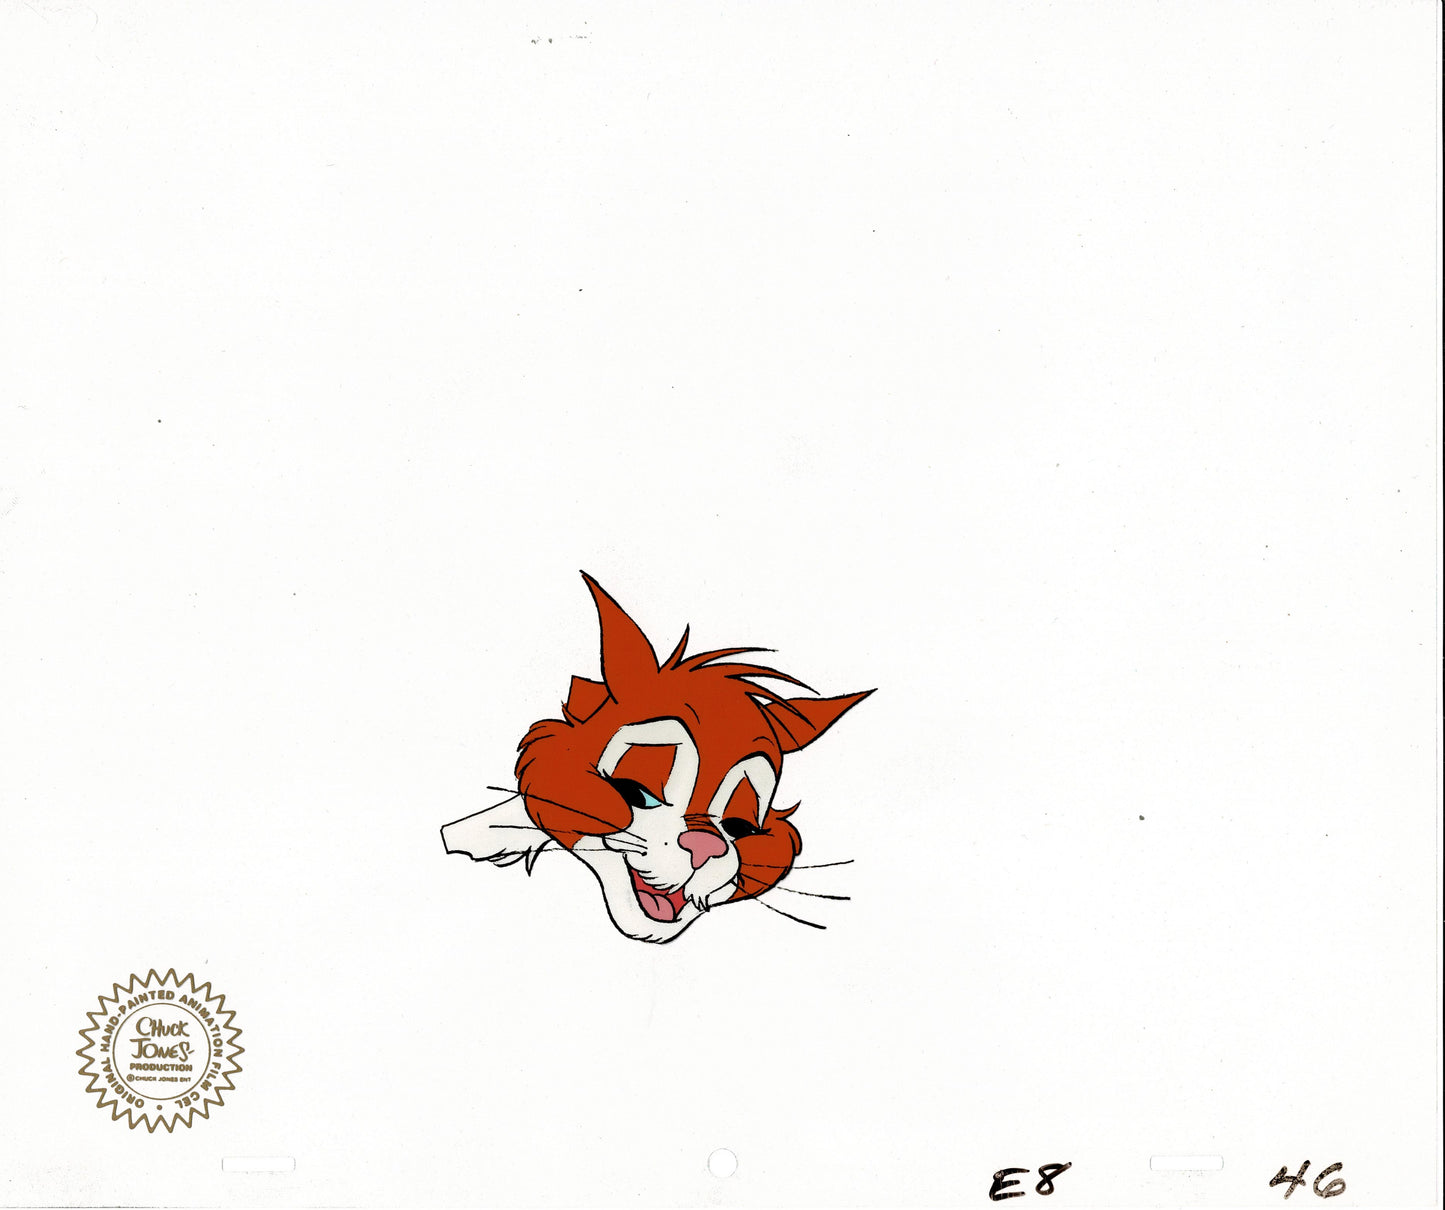 Yankee Doodle Cricket Harry the Cat by Chuck Jones 1975 Original Production Animation Cel With Studio Seal 46